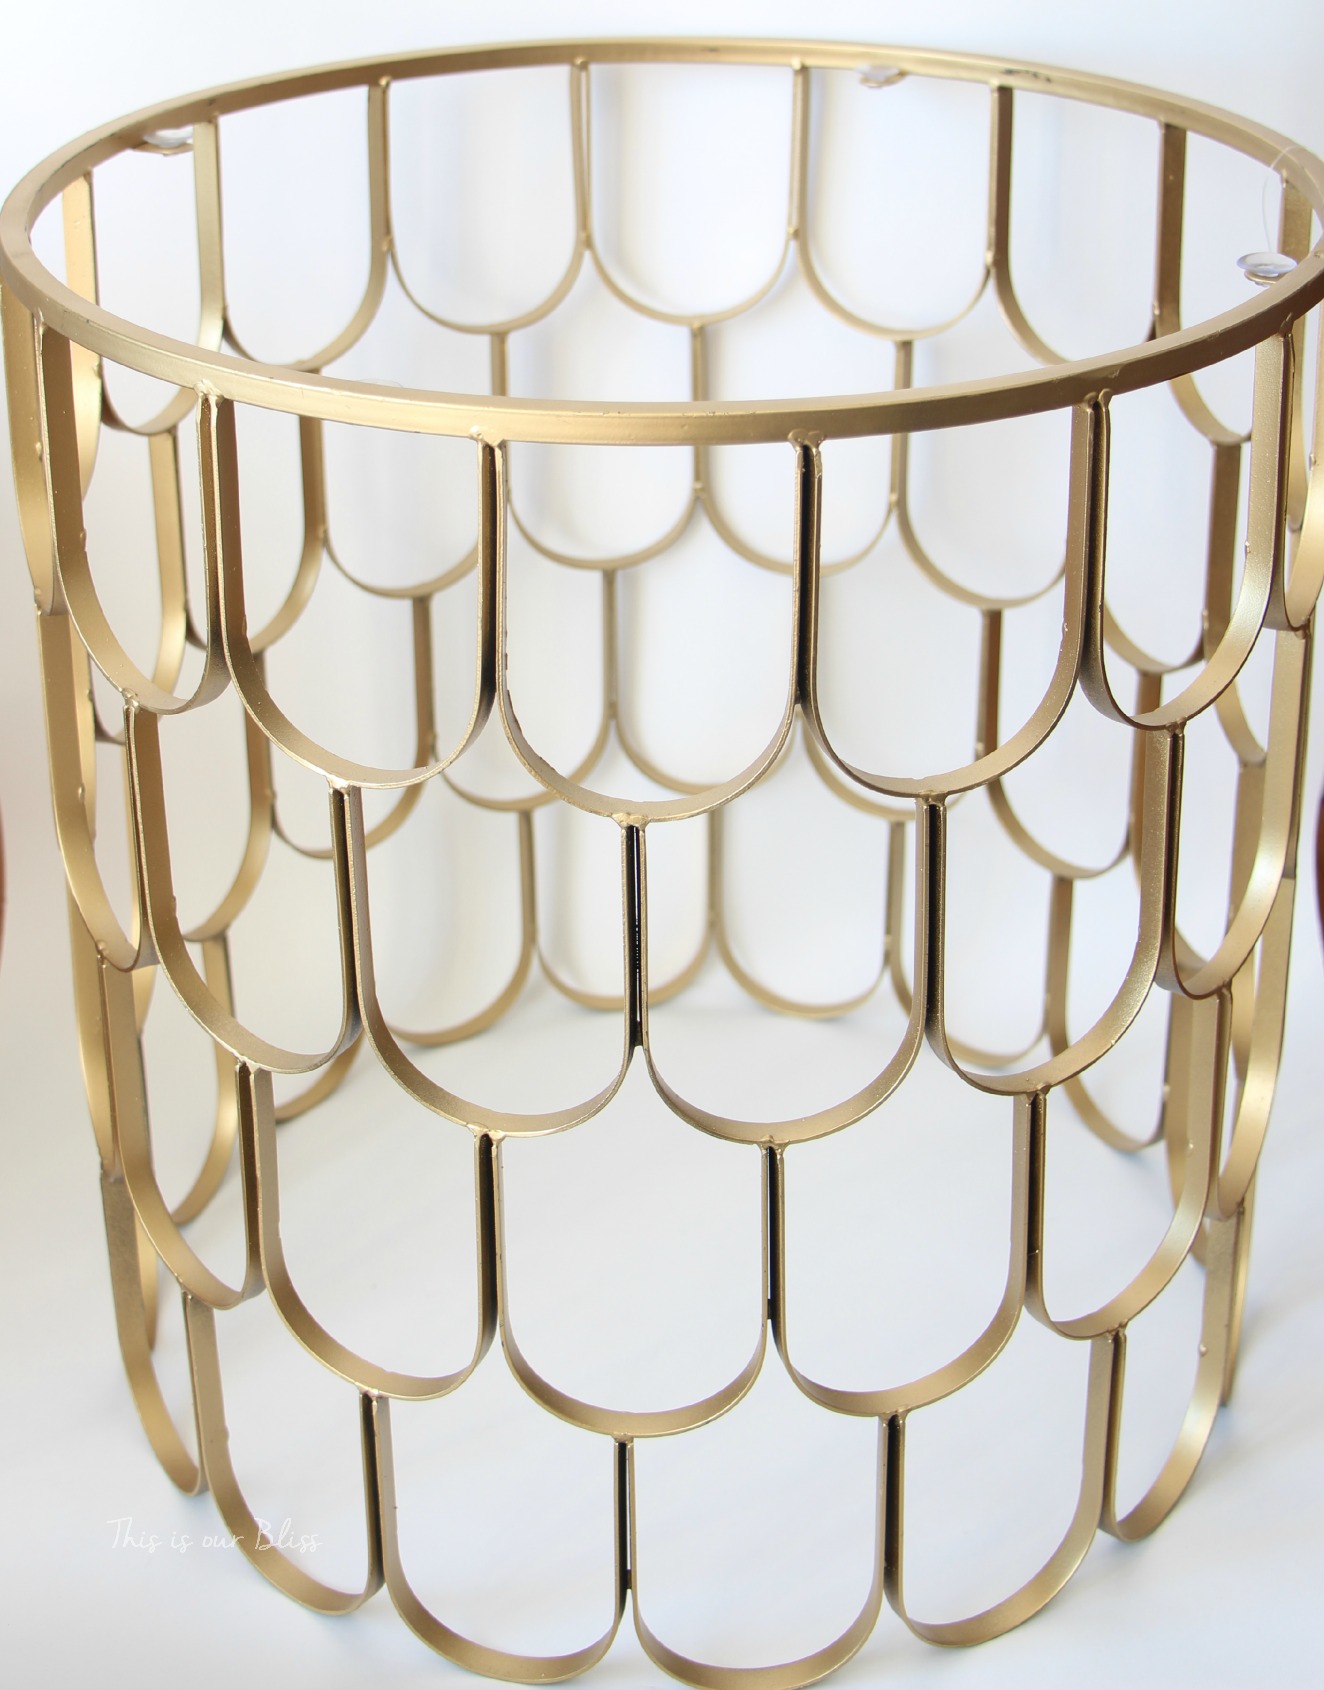 Gold metal frame for DIY laundry hamper - This is our Bliss